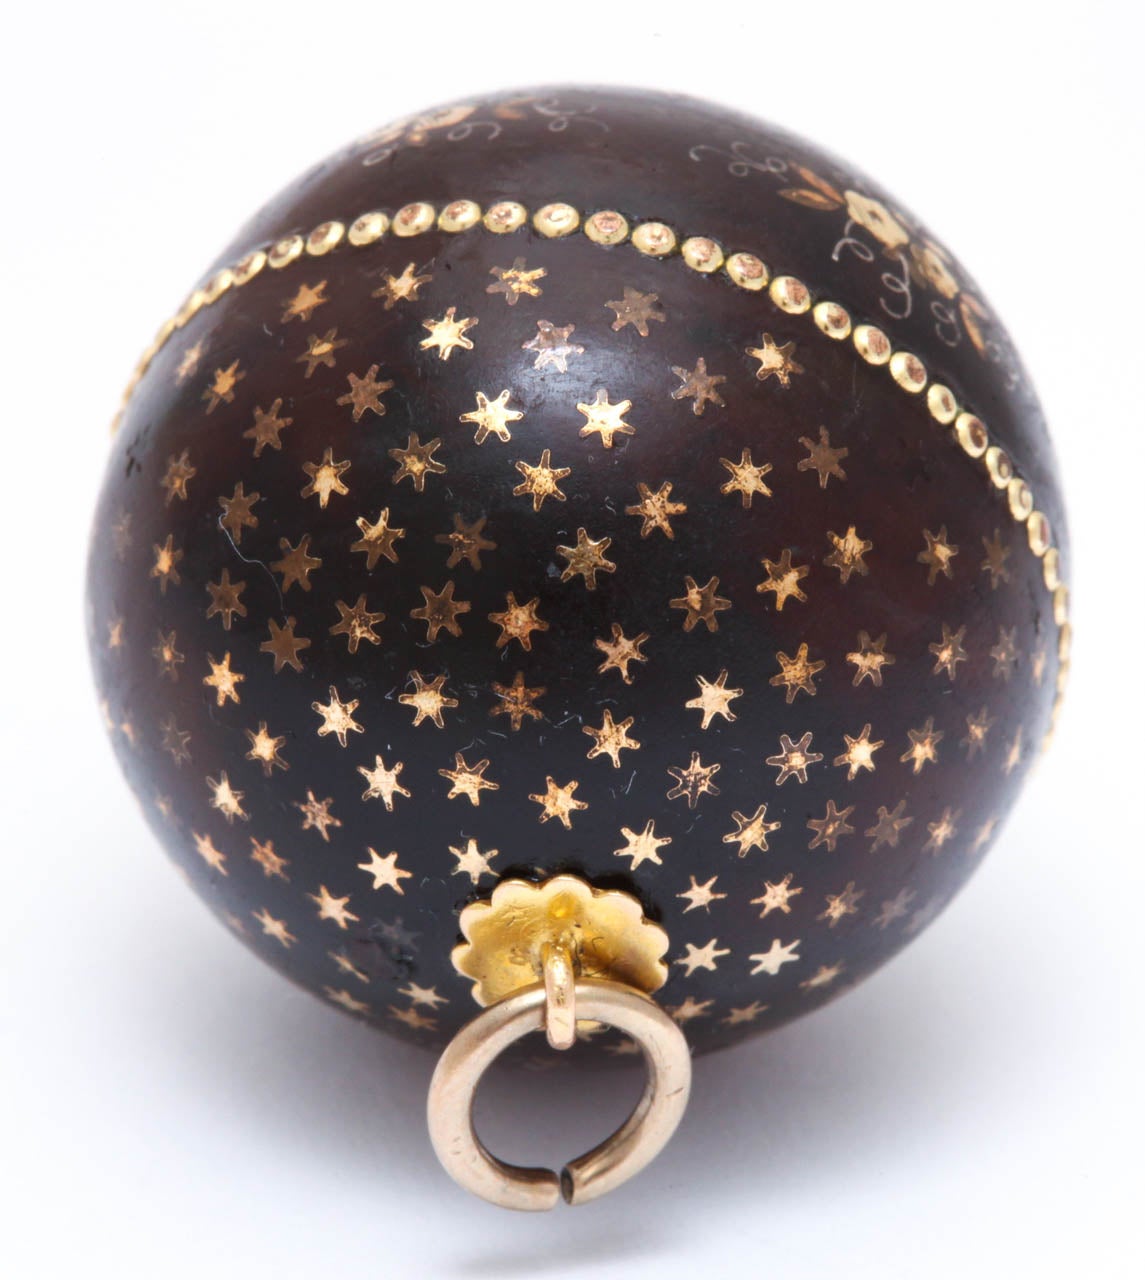 Women's Beads of Gold and Heavenly Stars and Flowers on a Pique Ball Pendant